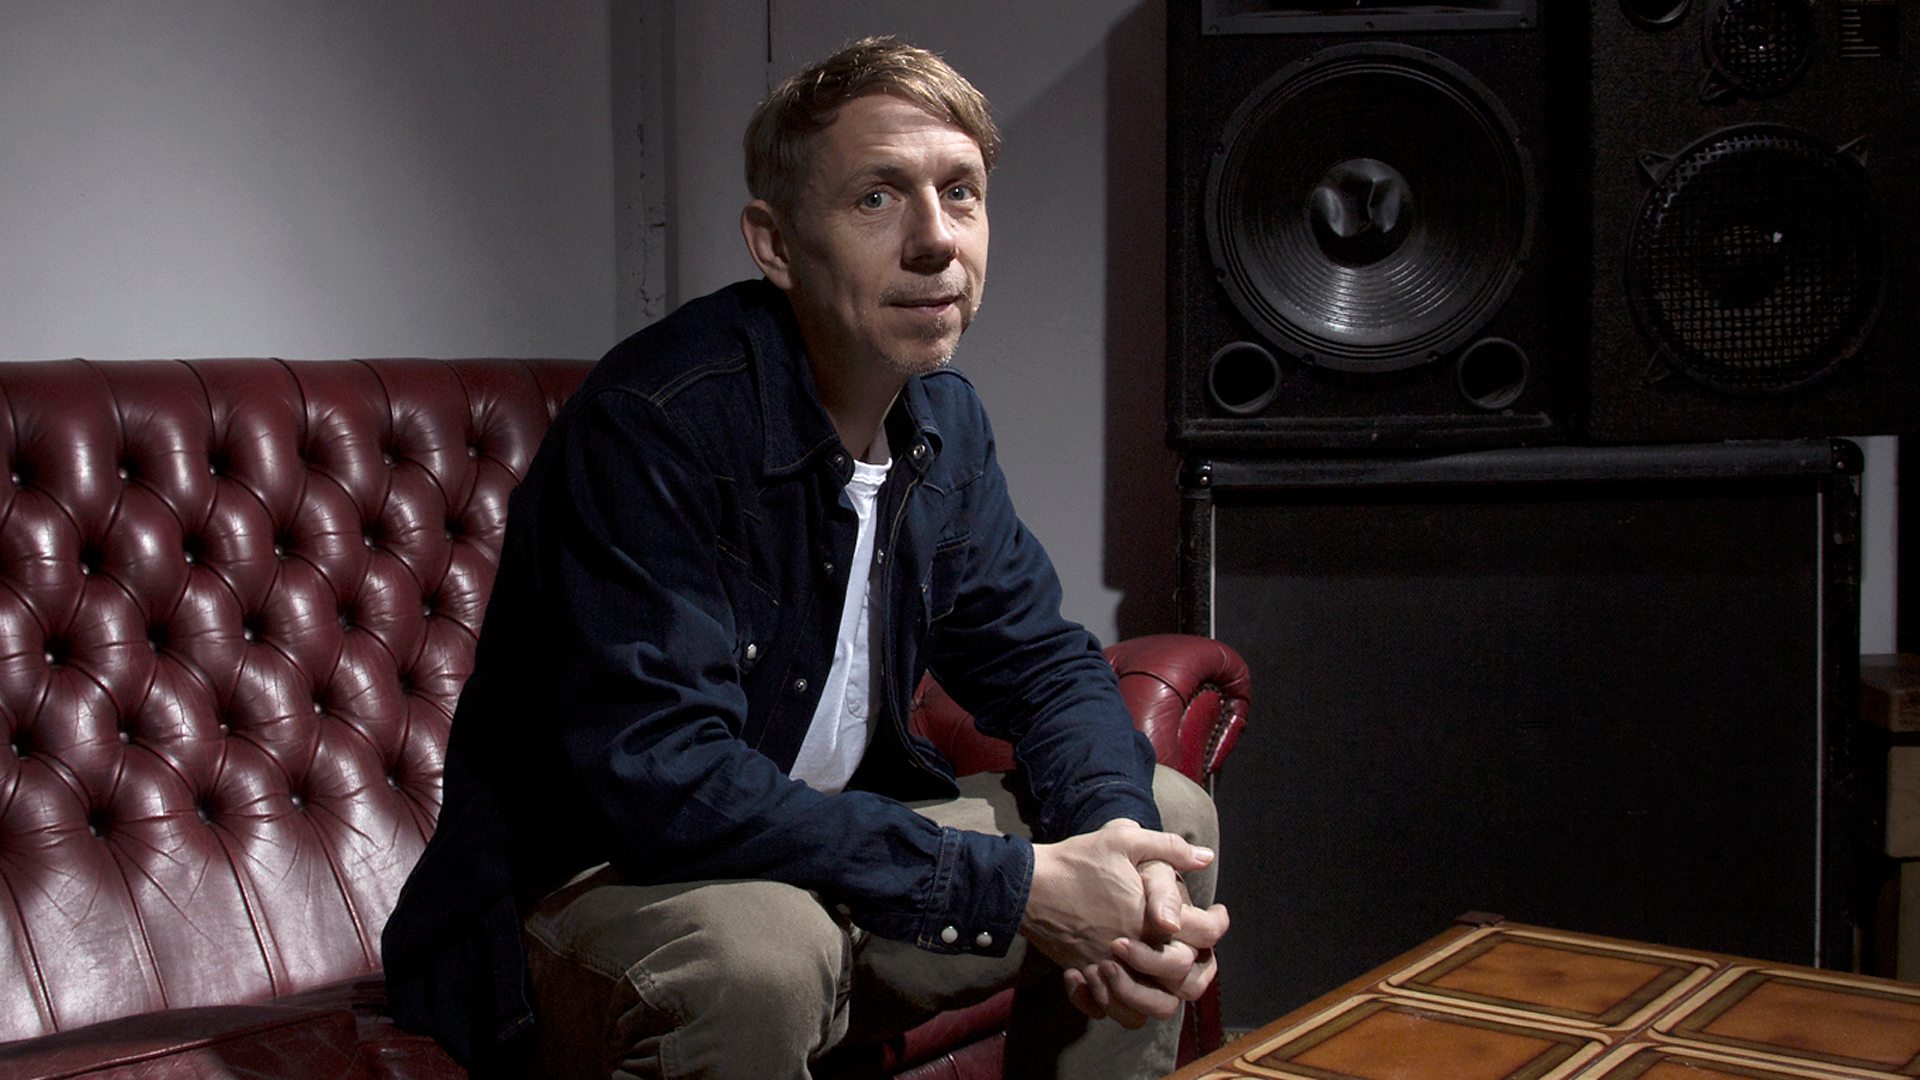 BBC Radio Music Gilles Peterson acts Gilles Peterson is buzzing  about right now